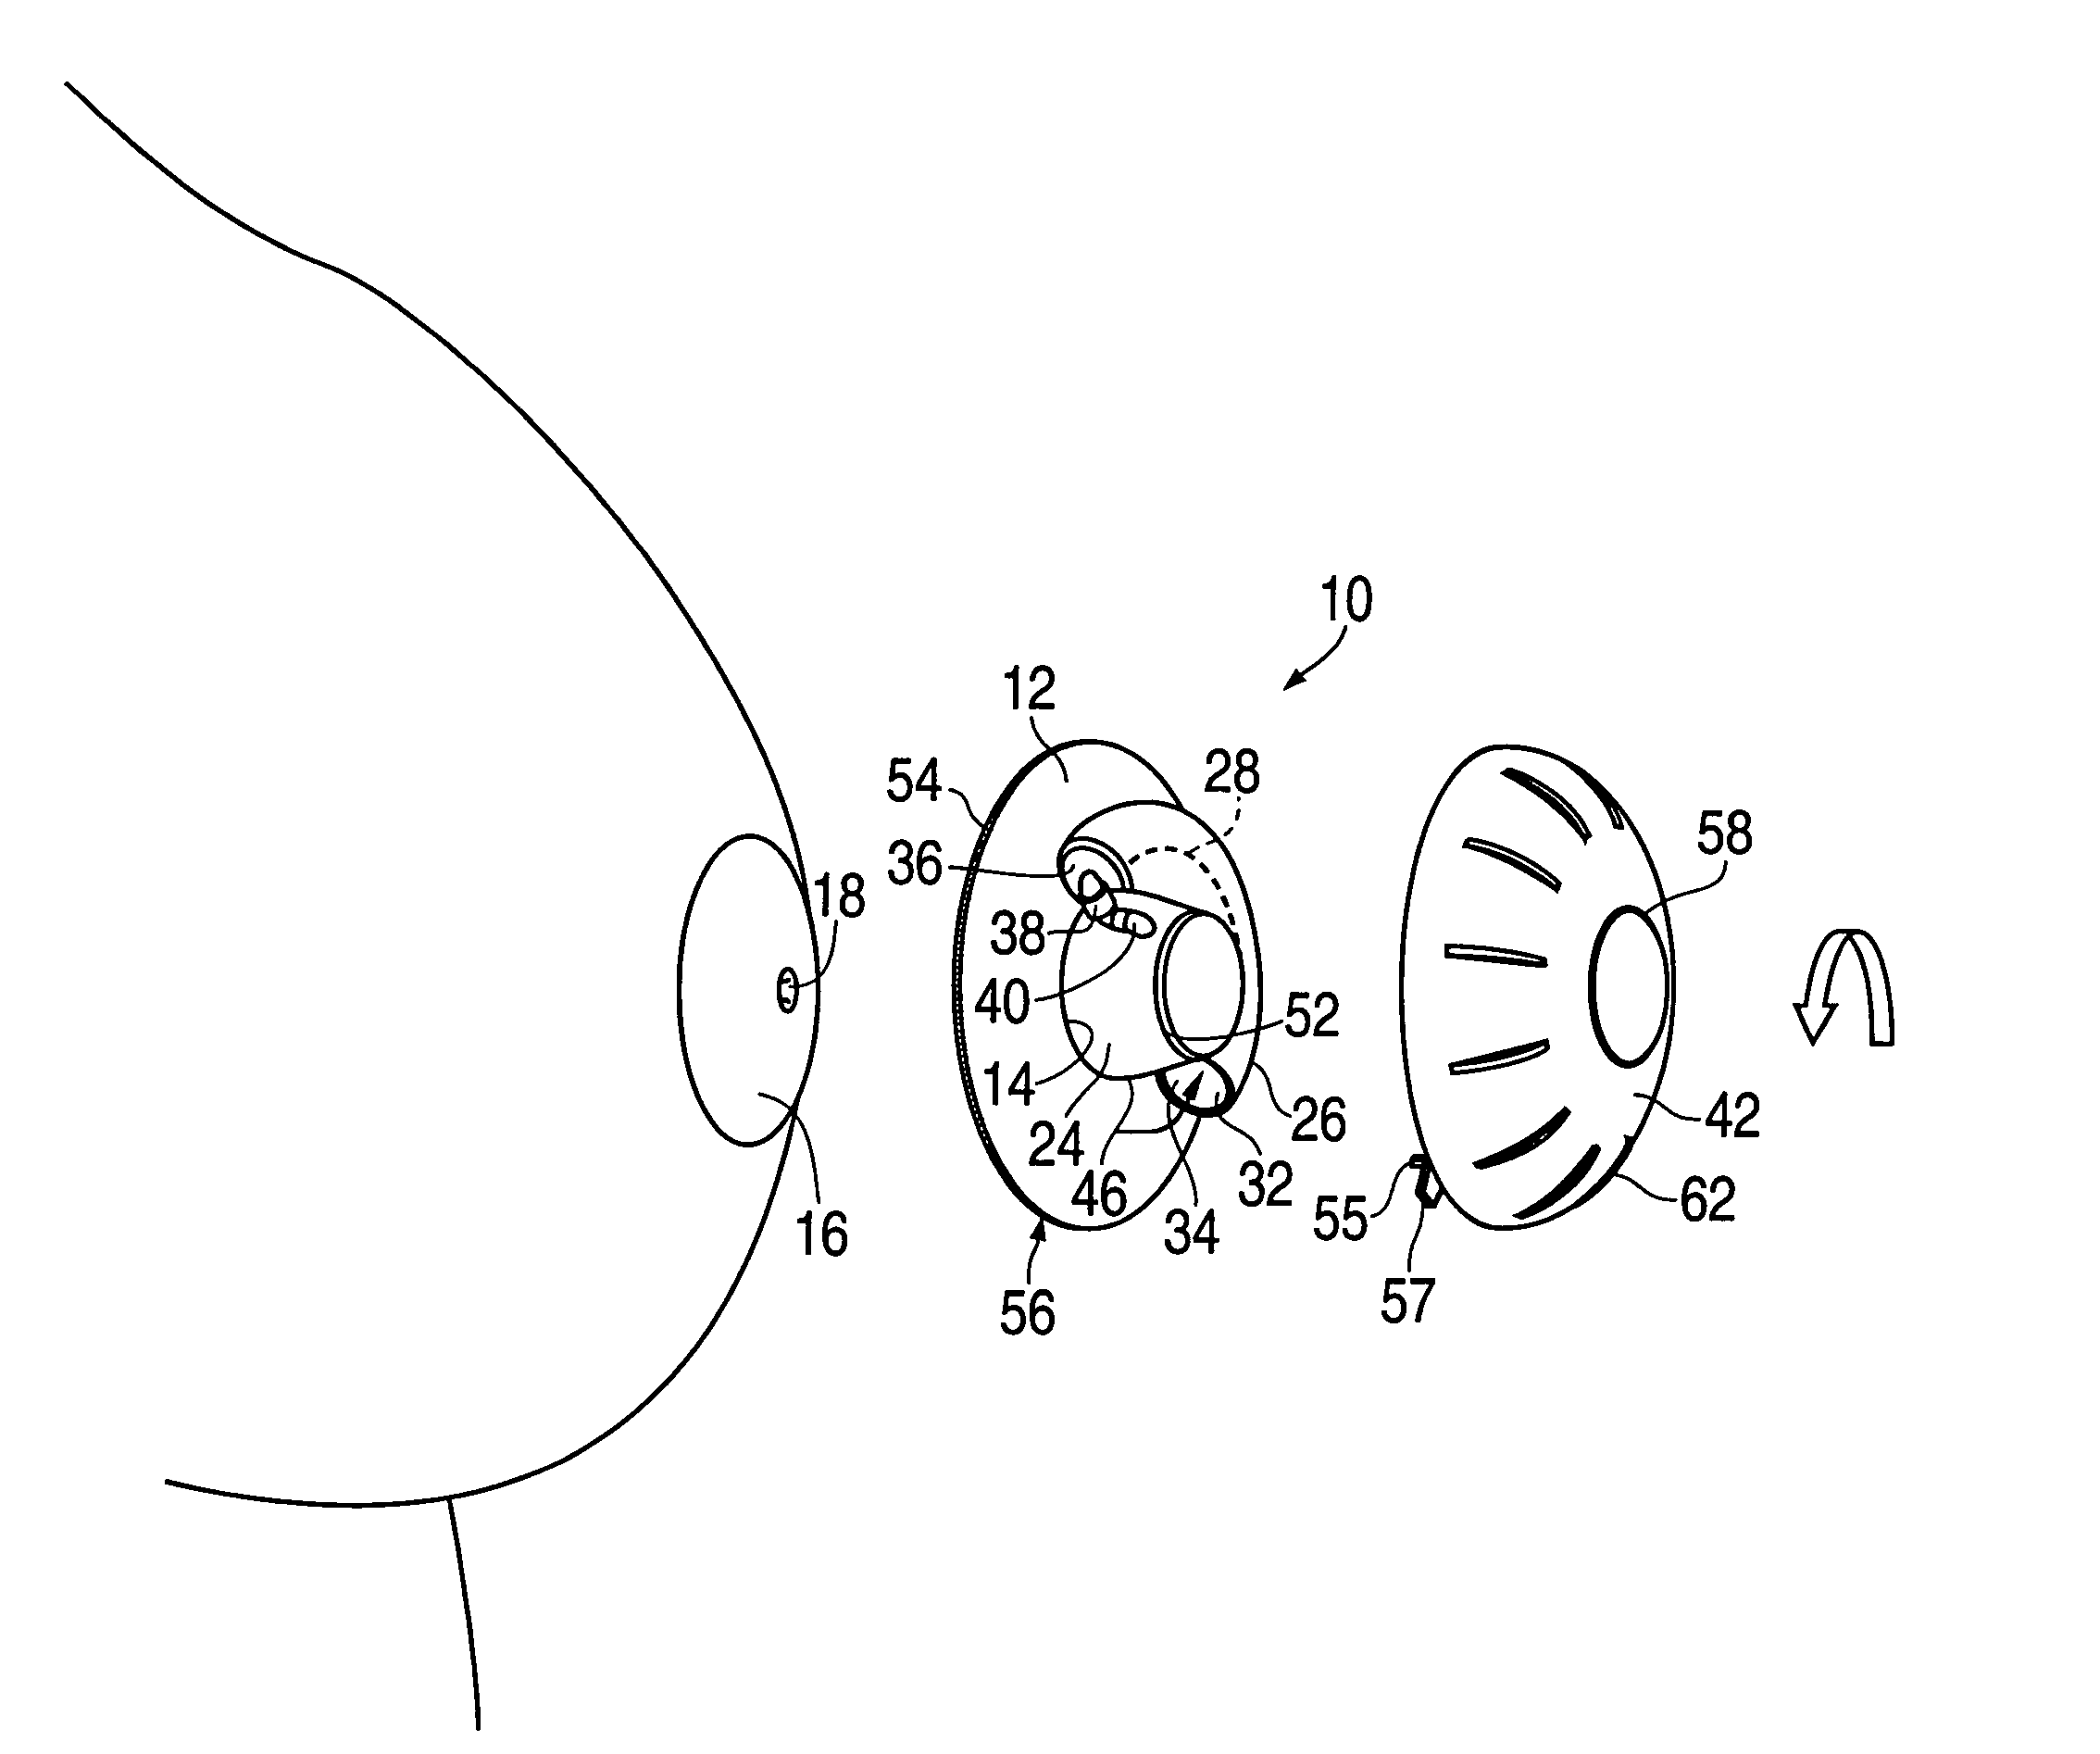 Device for non-surgical correction of congenital inverted nipples and/or collection of nipple aspirate fluid